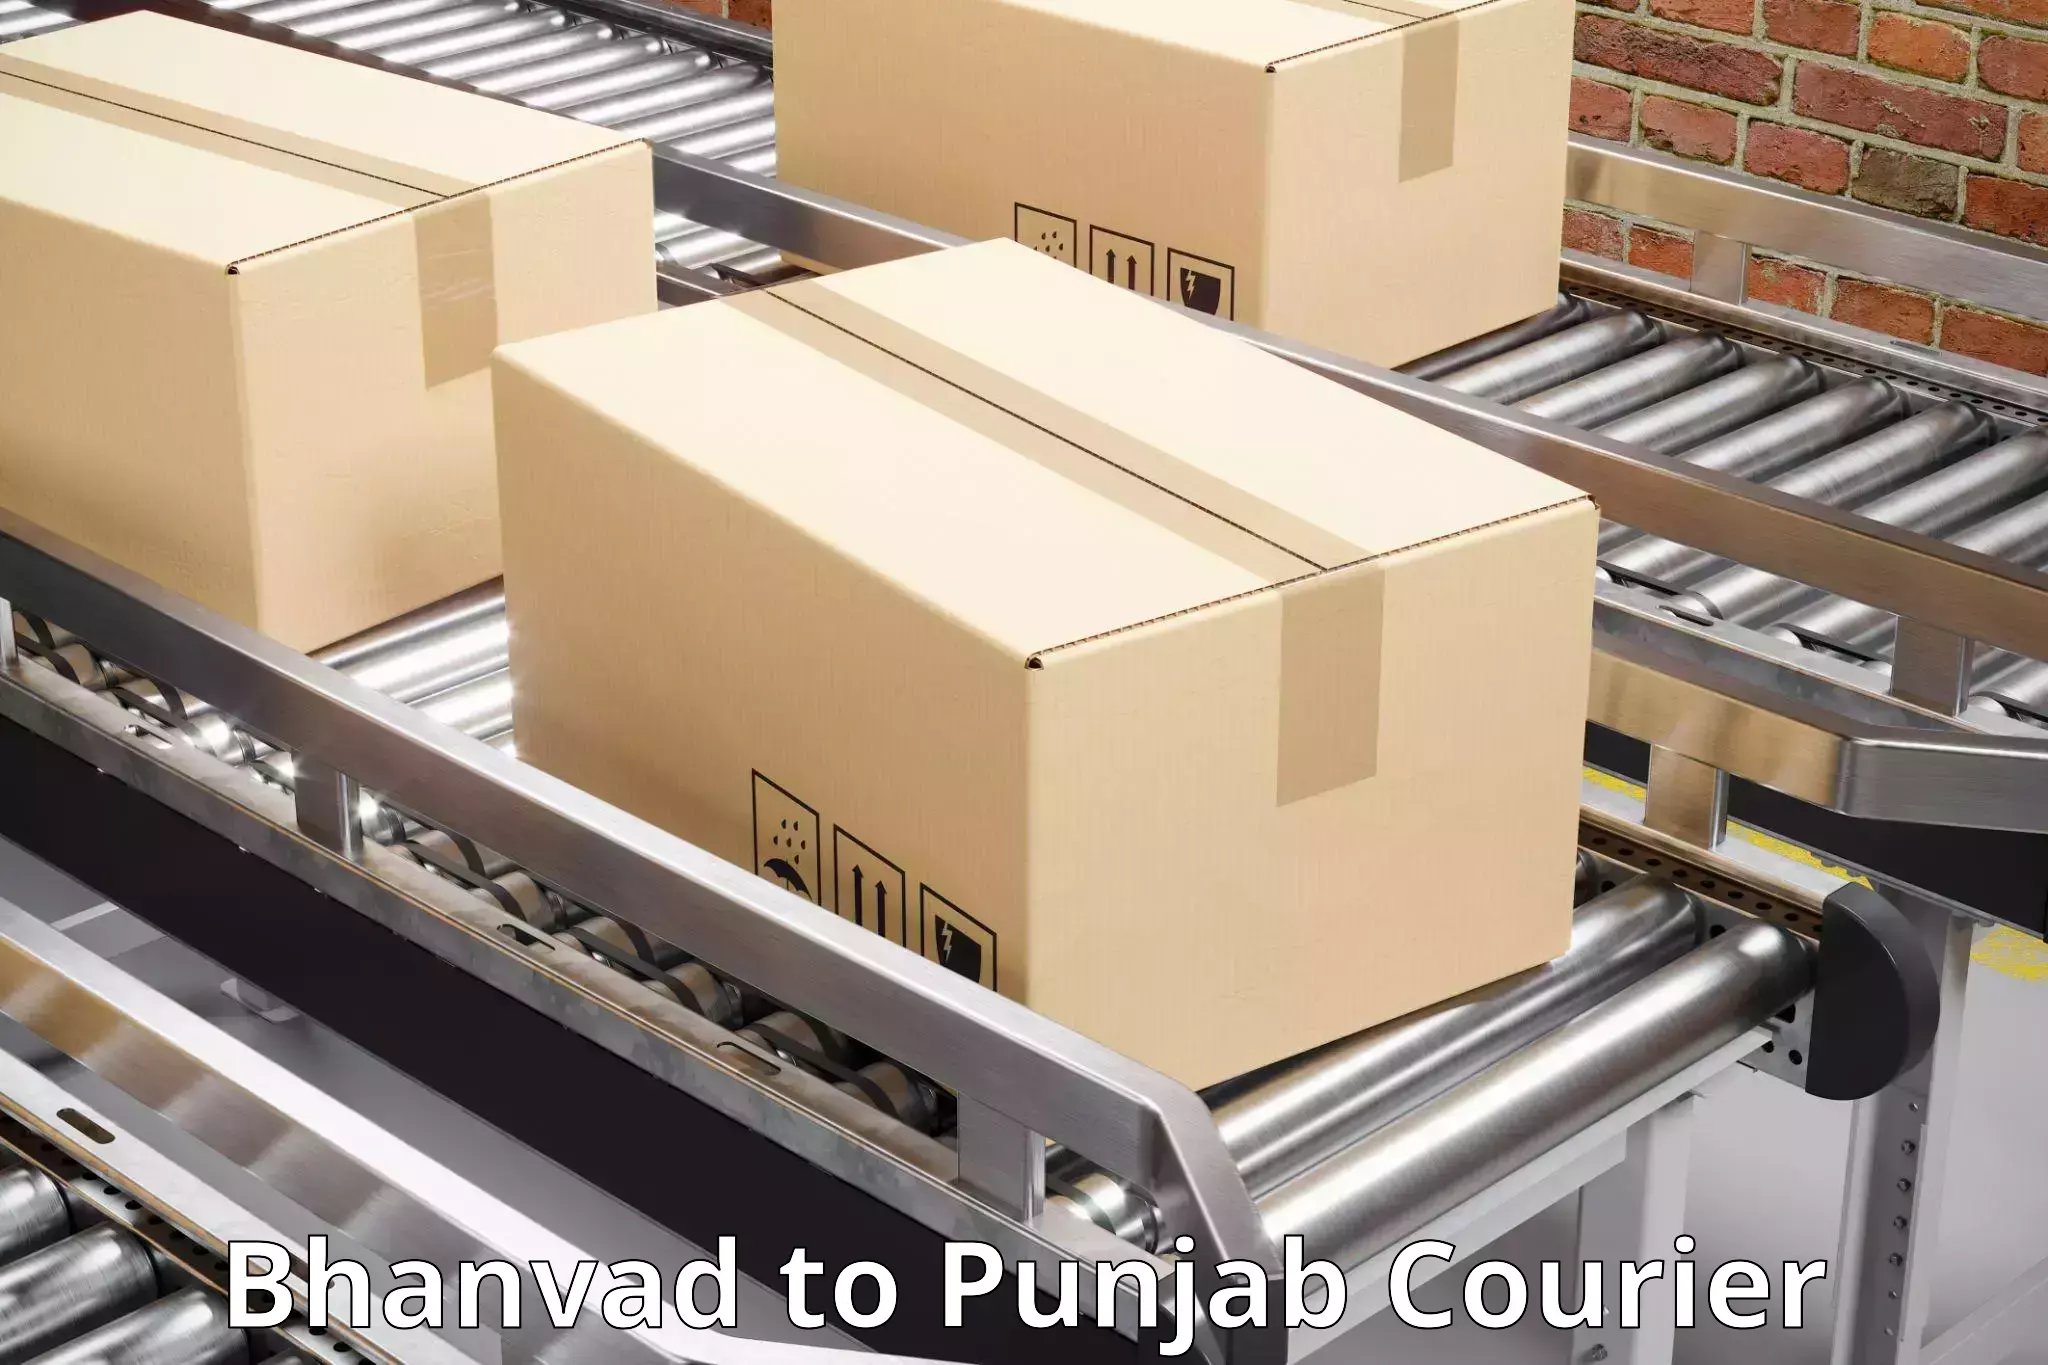 Efficient courier operations Bhanvad to Mohali